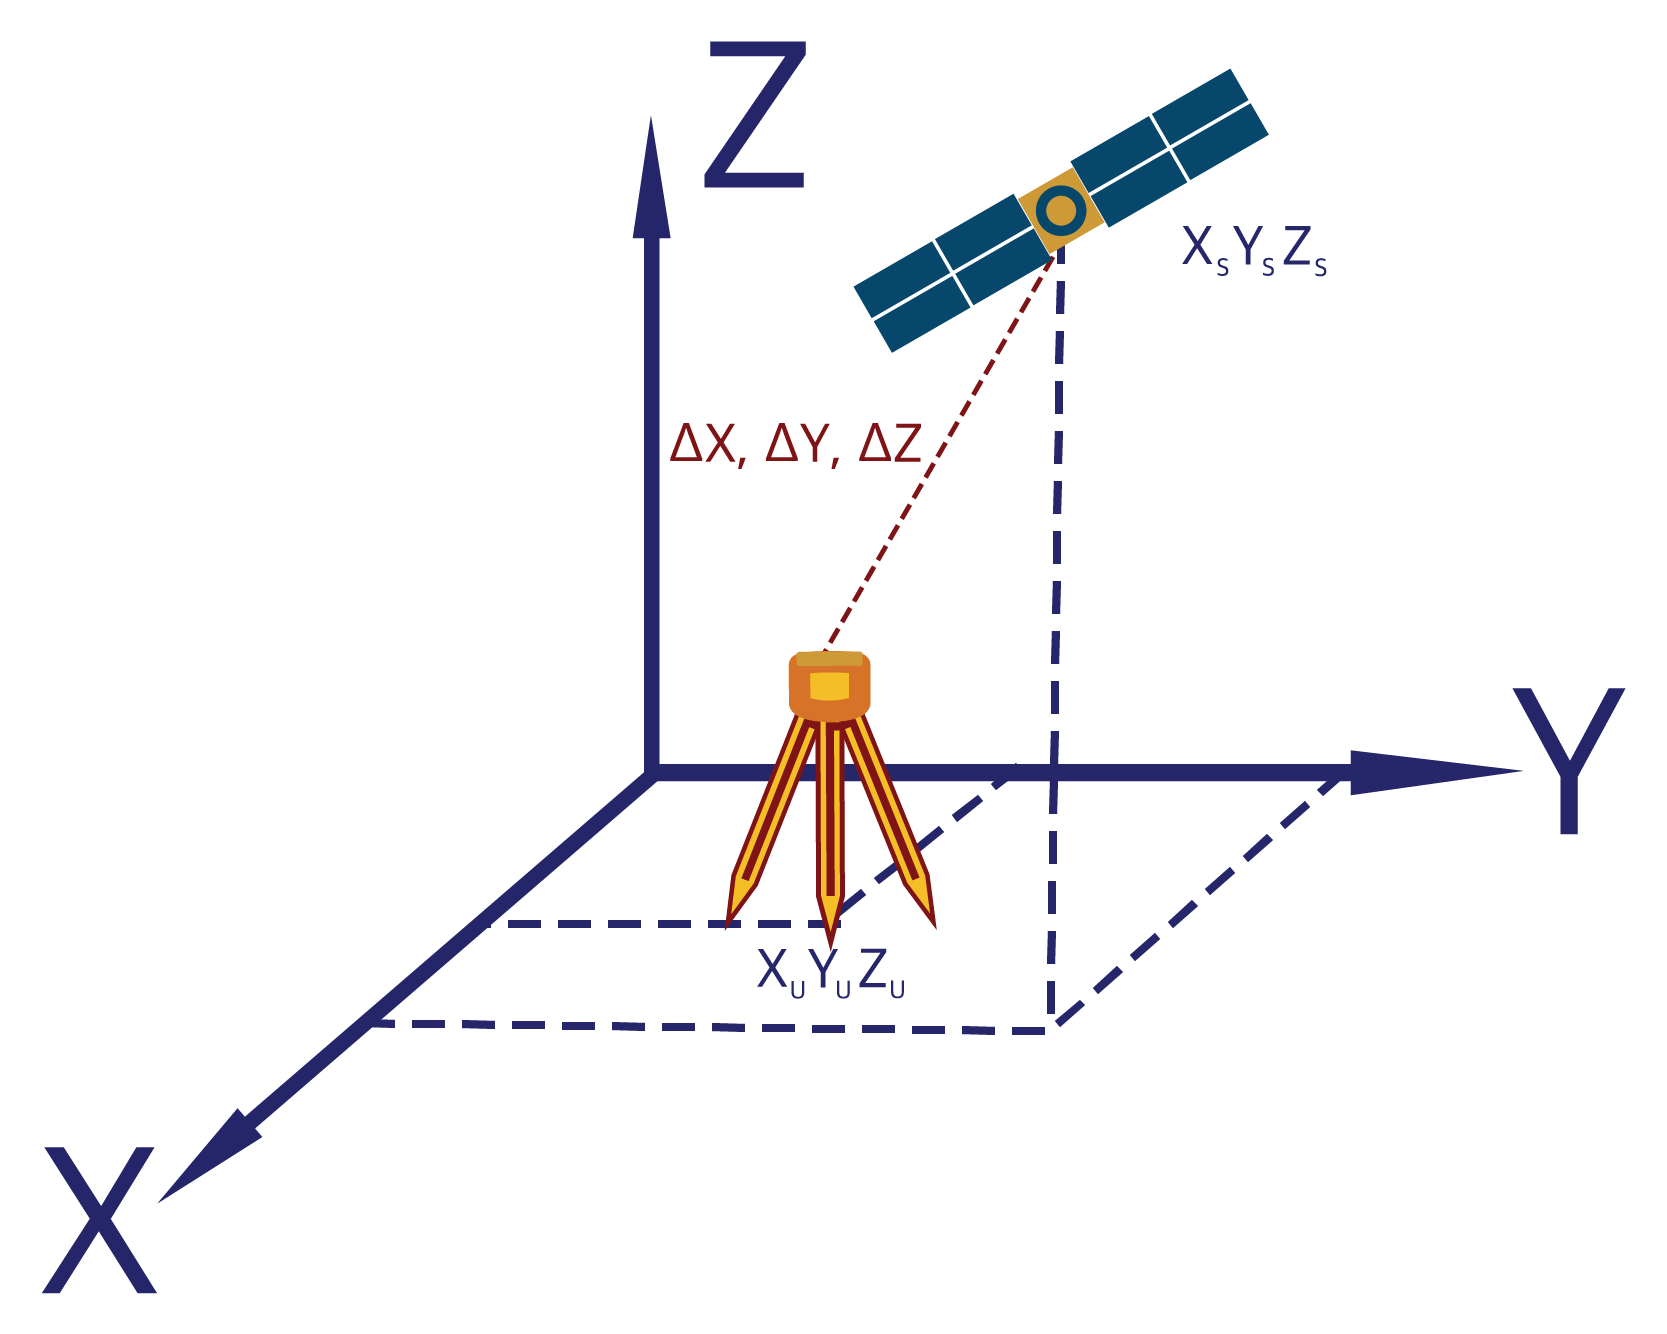 Diagram showing Range from receiver to satellite